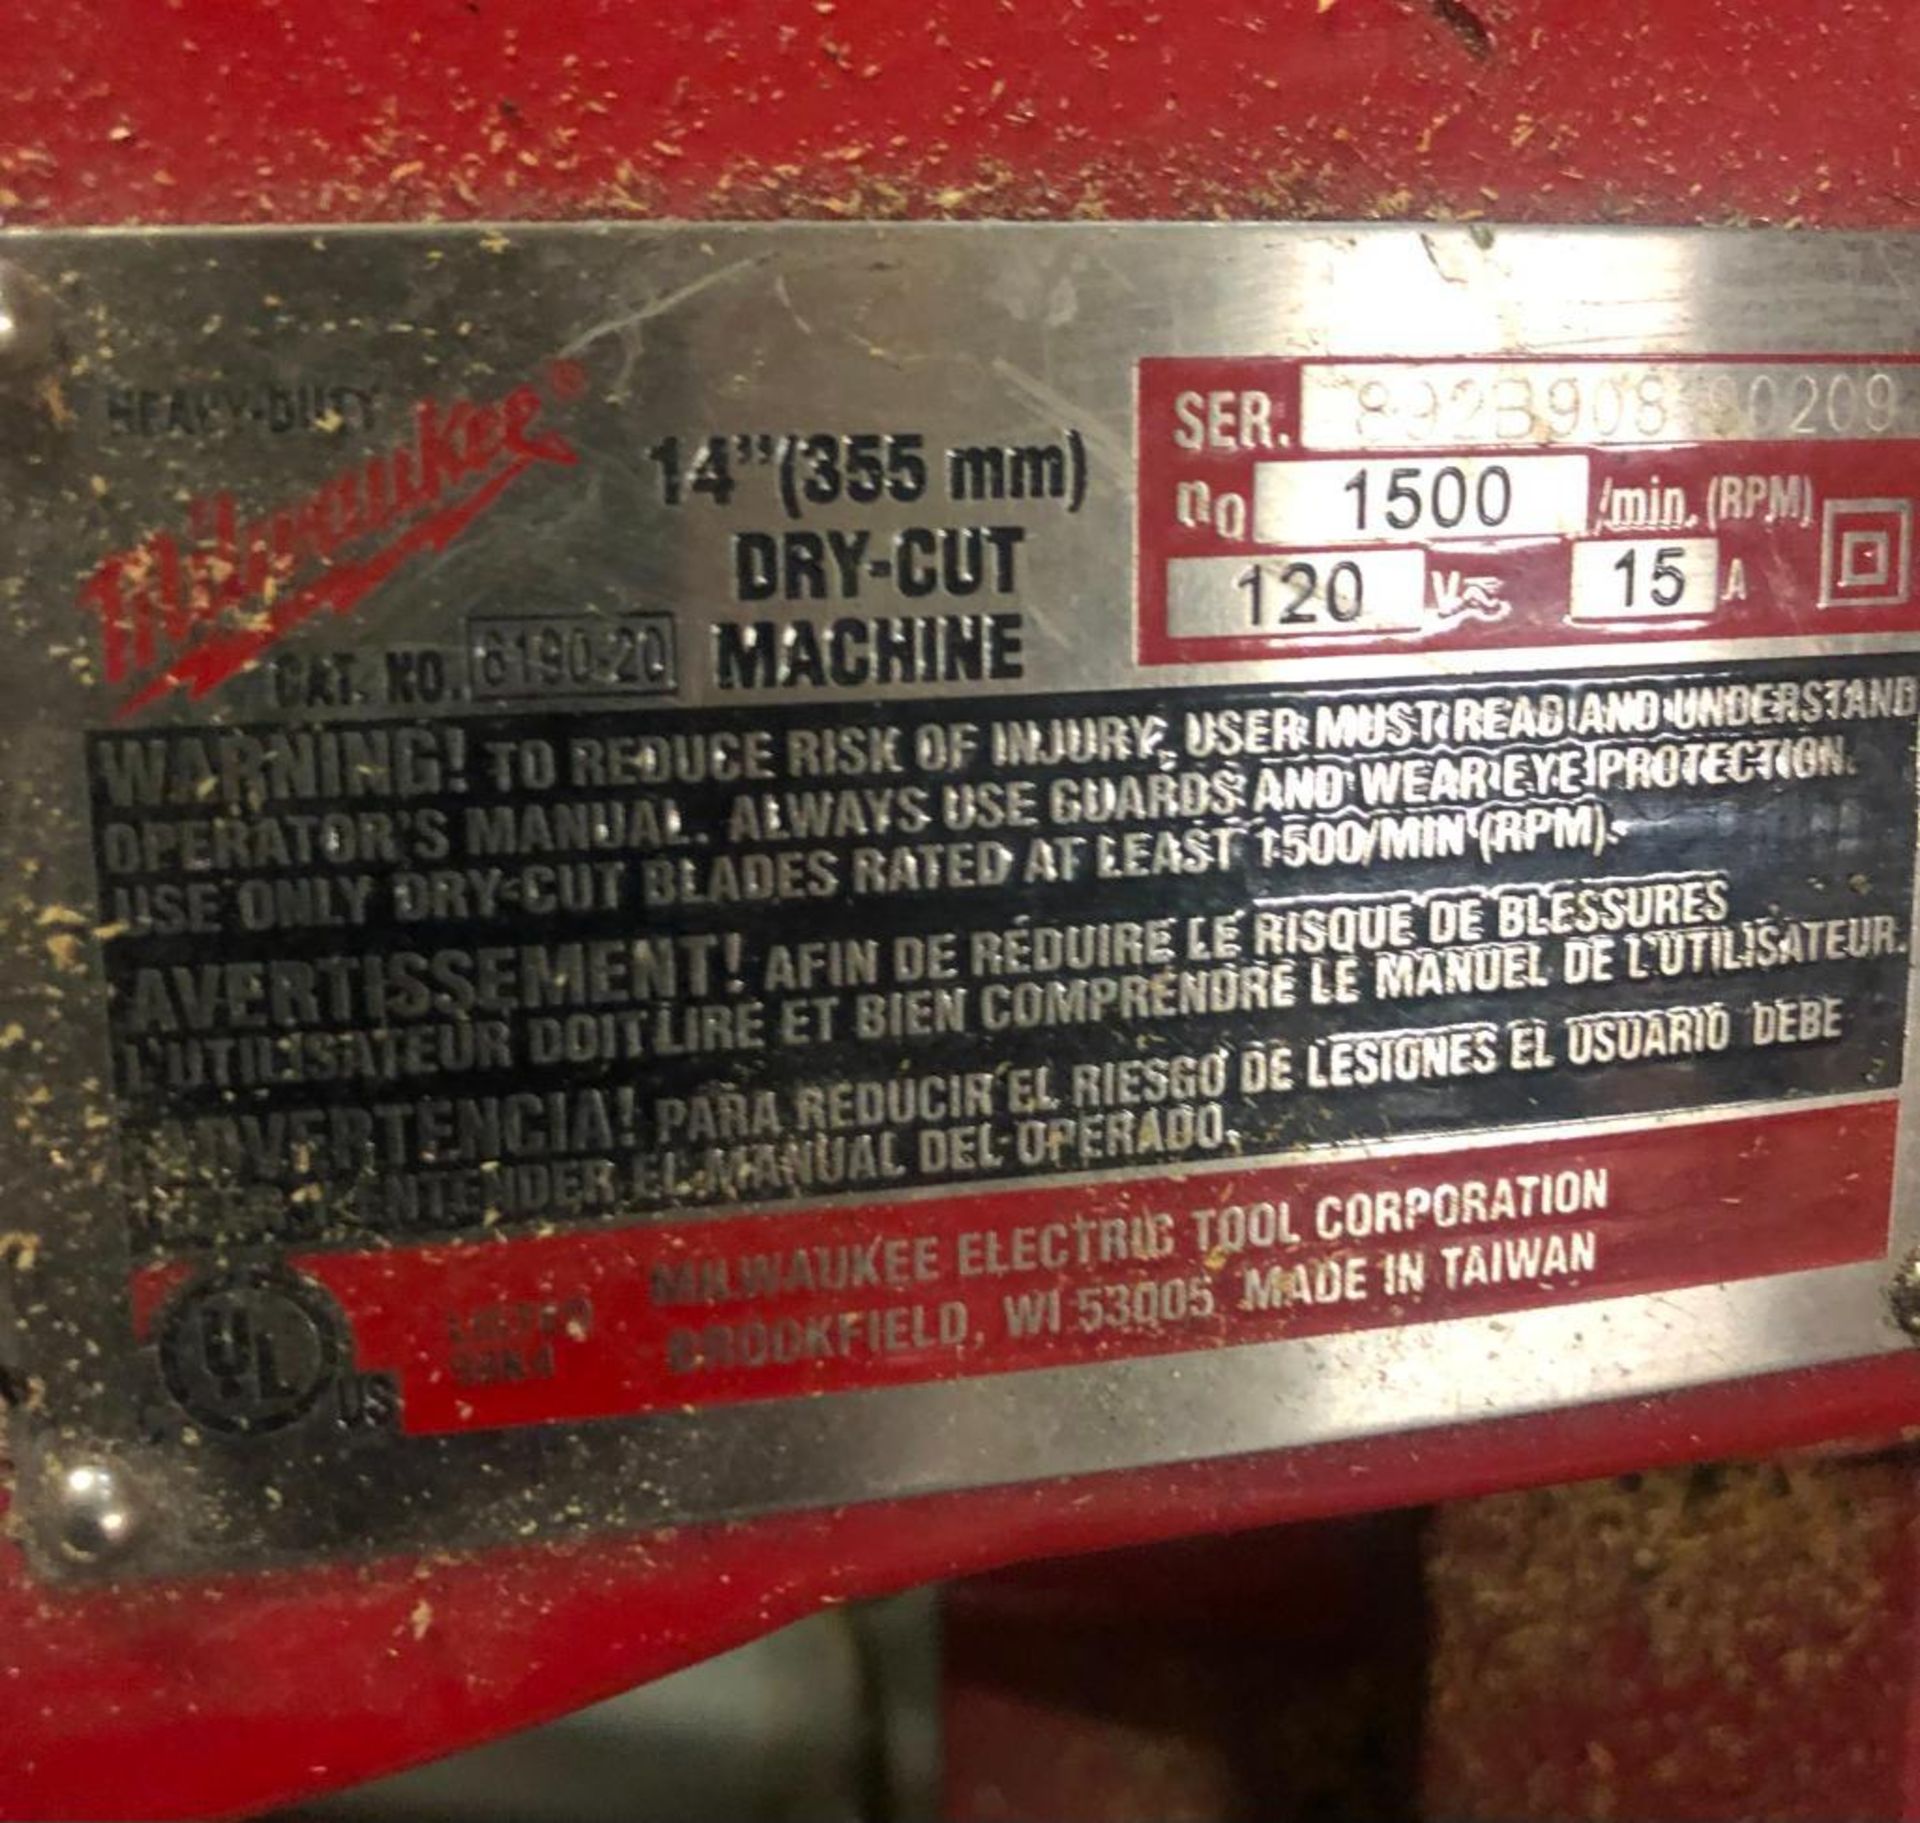 MILWAUKEE 14'' METAL CUT-OFF SAW, CAT NUMBER 619020 - Image 3 of 3